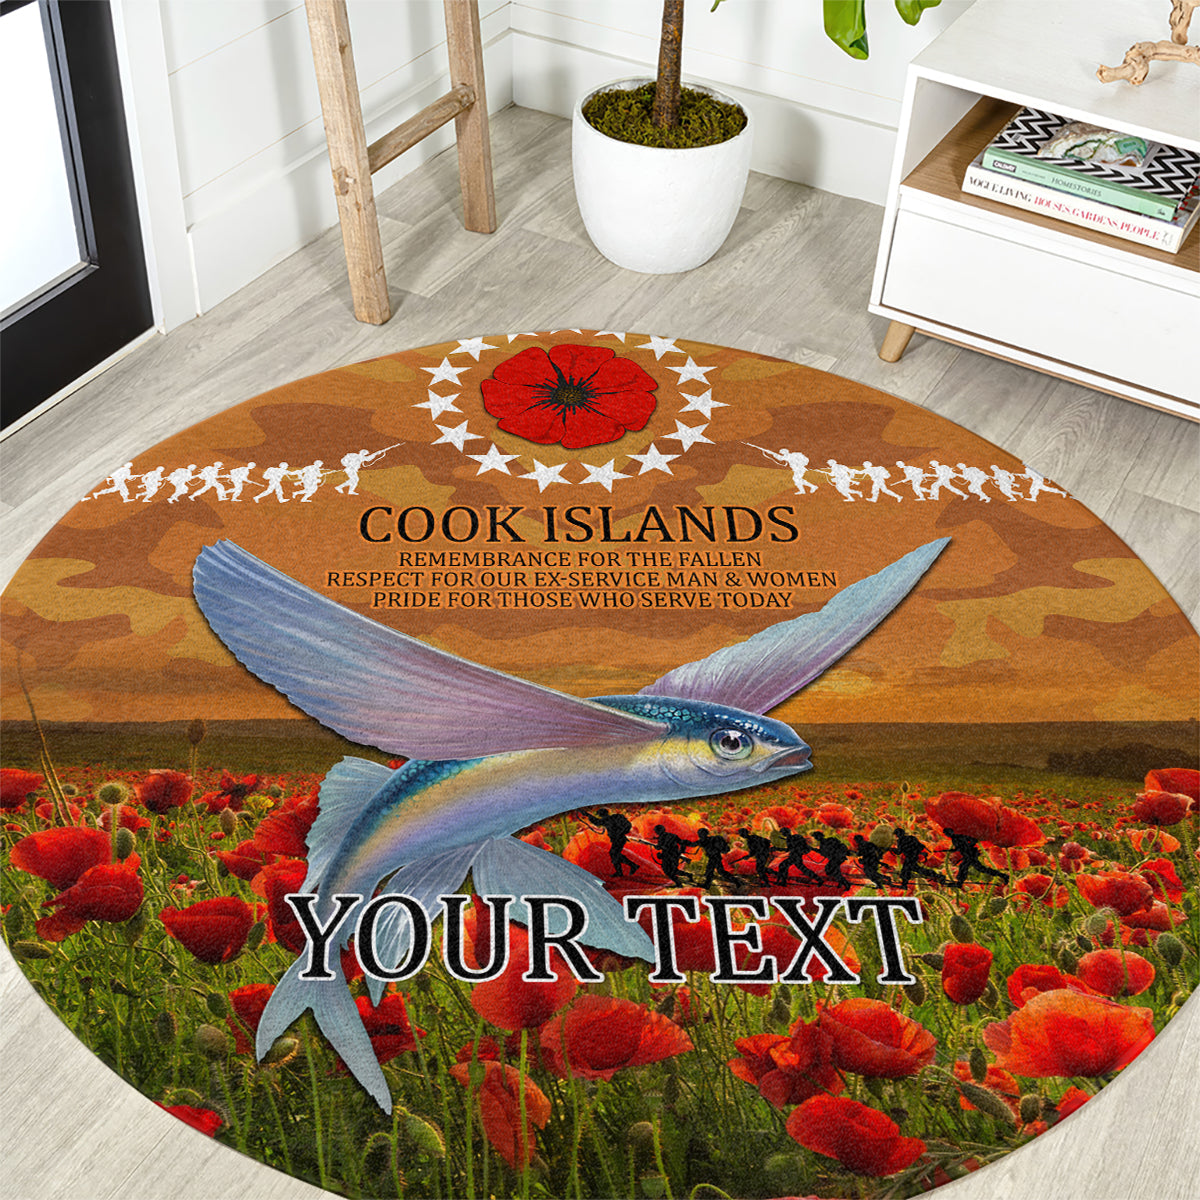 Cook Islands ANZAC Day Personalised Round Carpet with Poppy Field LT9 Art - Polynesian Pride